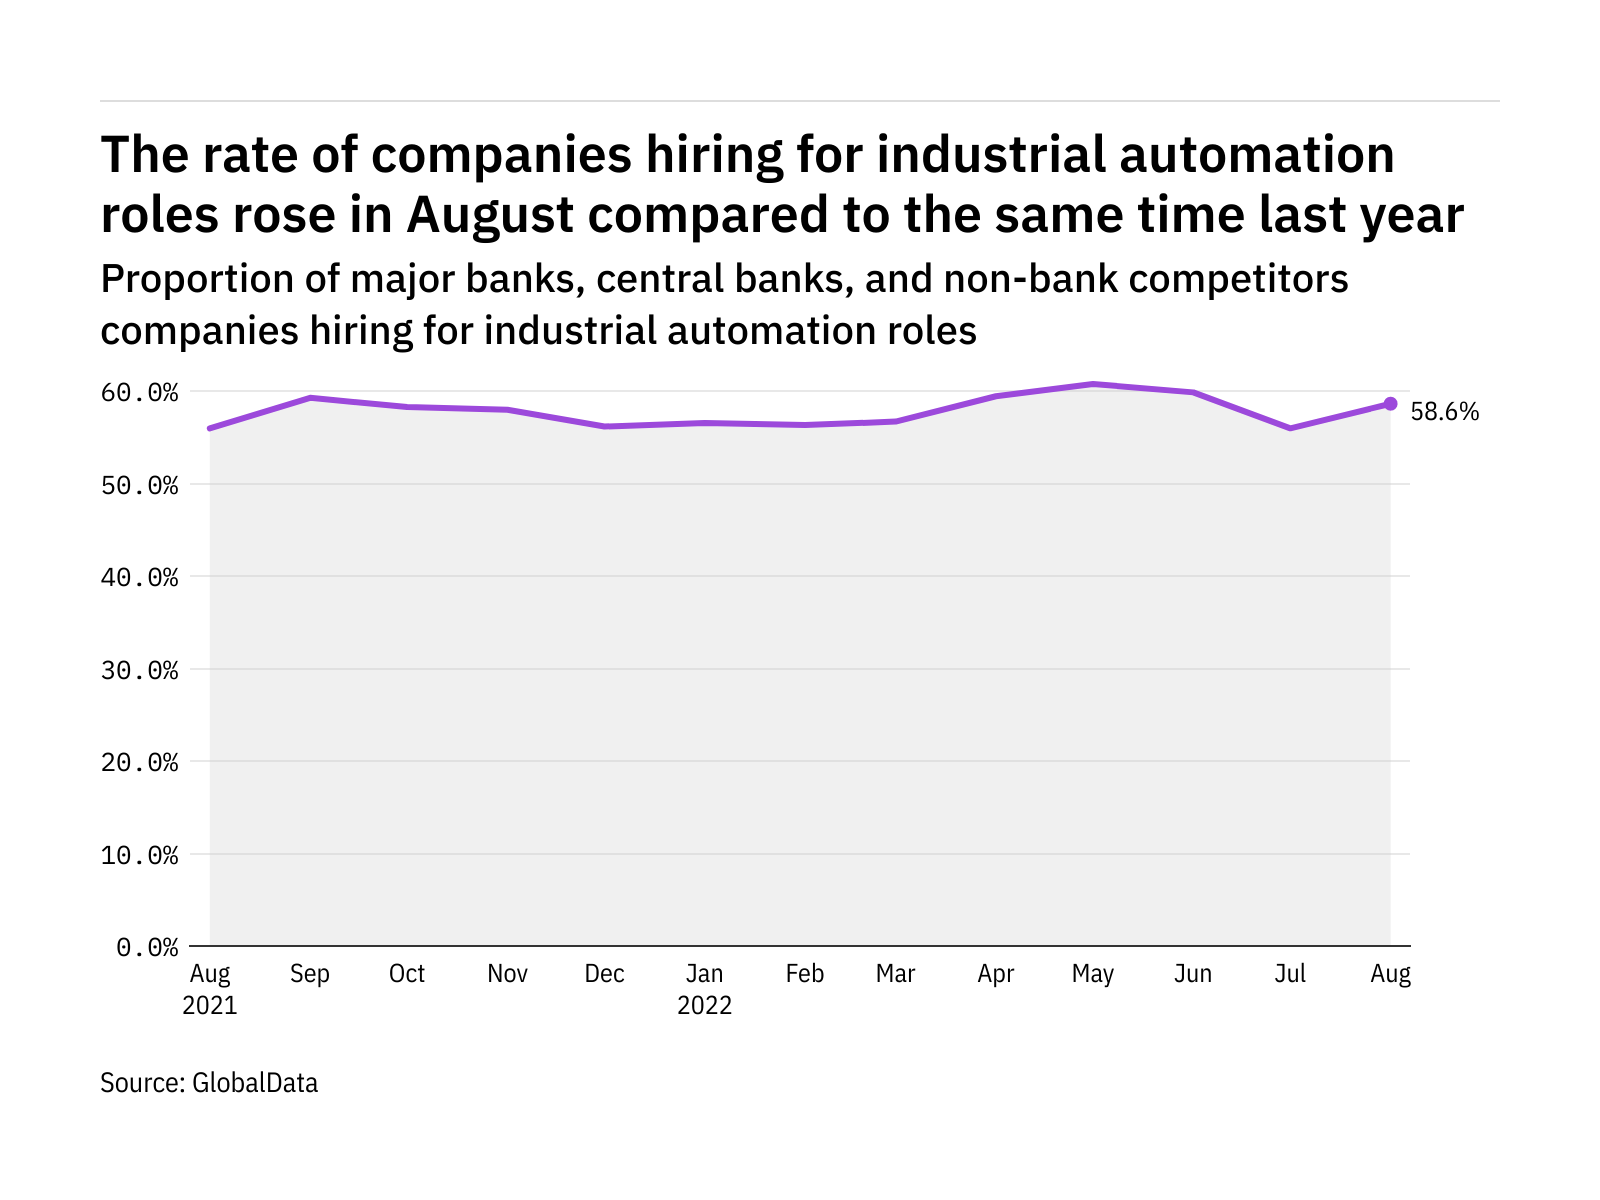 Industrial automation hiring levels in the retail banking industry rose in August 2022